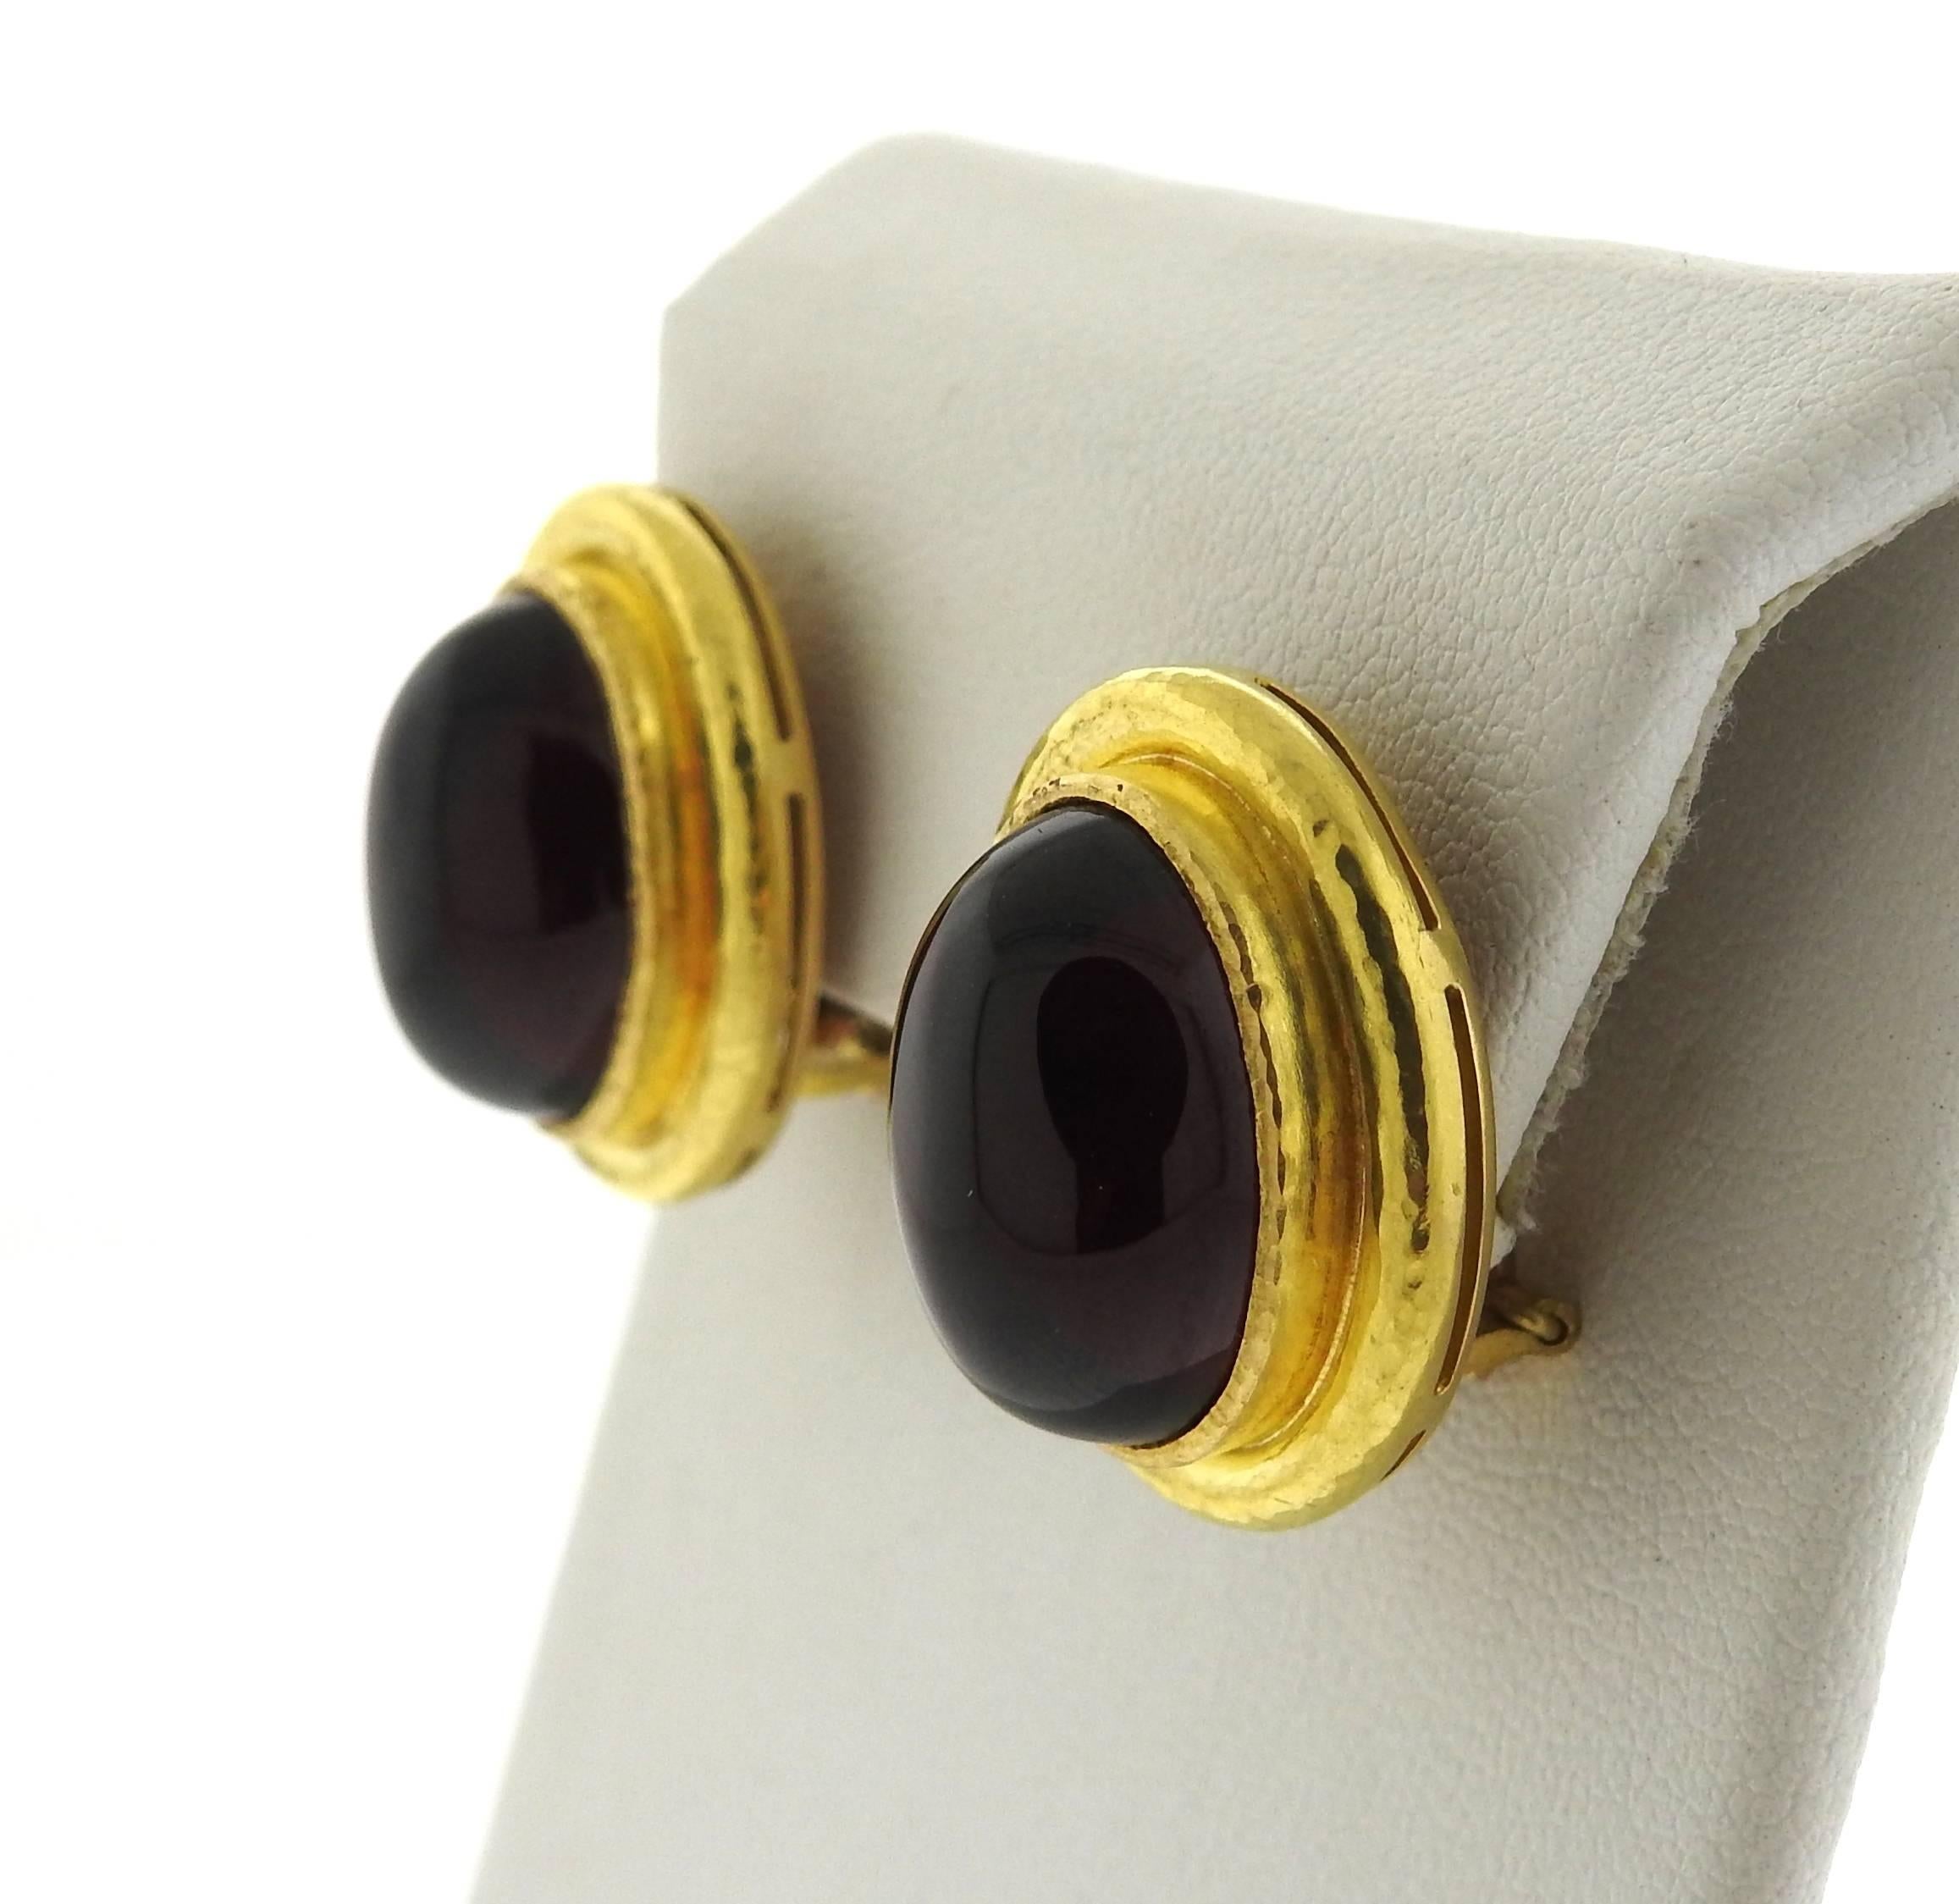 A pair of 18K yellow gold earrings set with oval garnet cabochons measuring 17.5mm x 12.5mm.  The earrings measure 23mm x 19.7mm and weigh 22.3 grams.